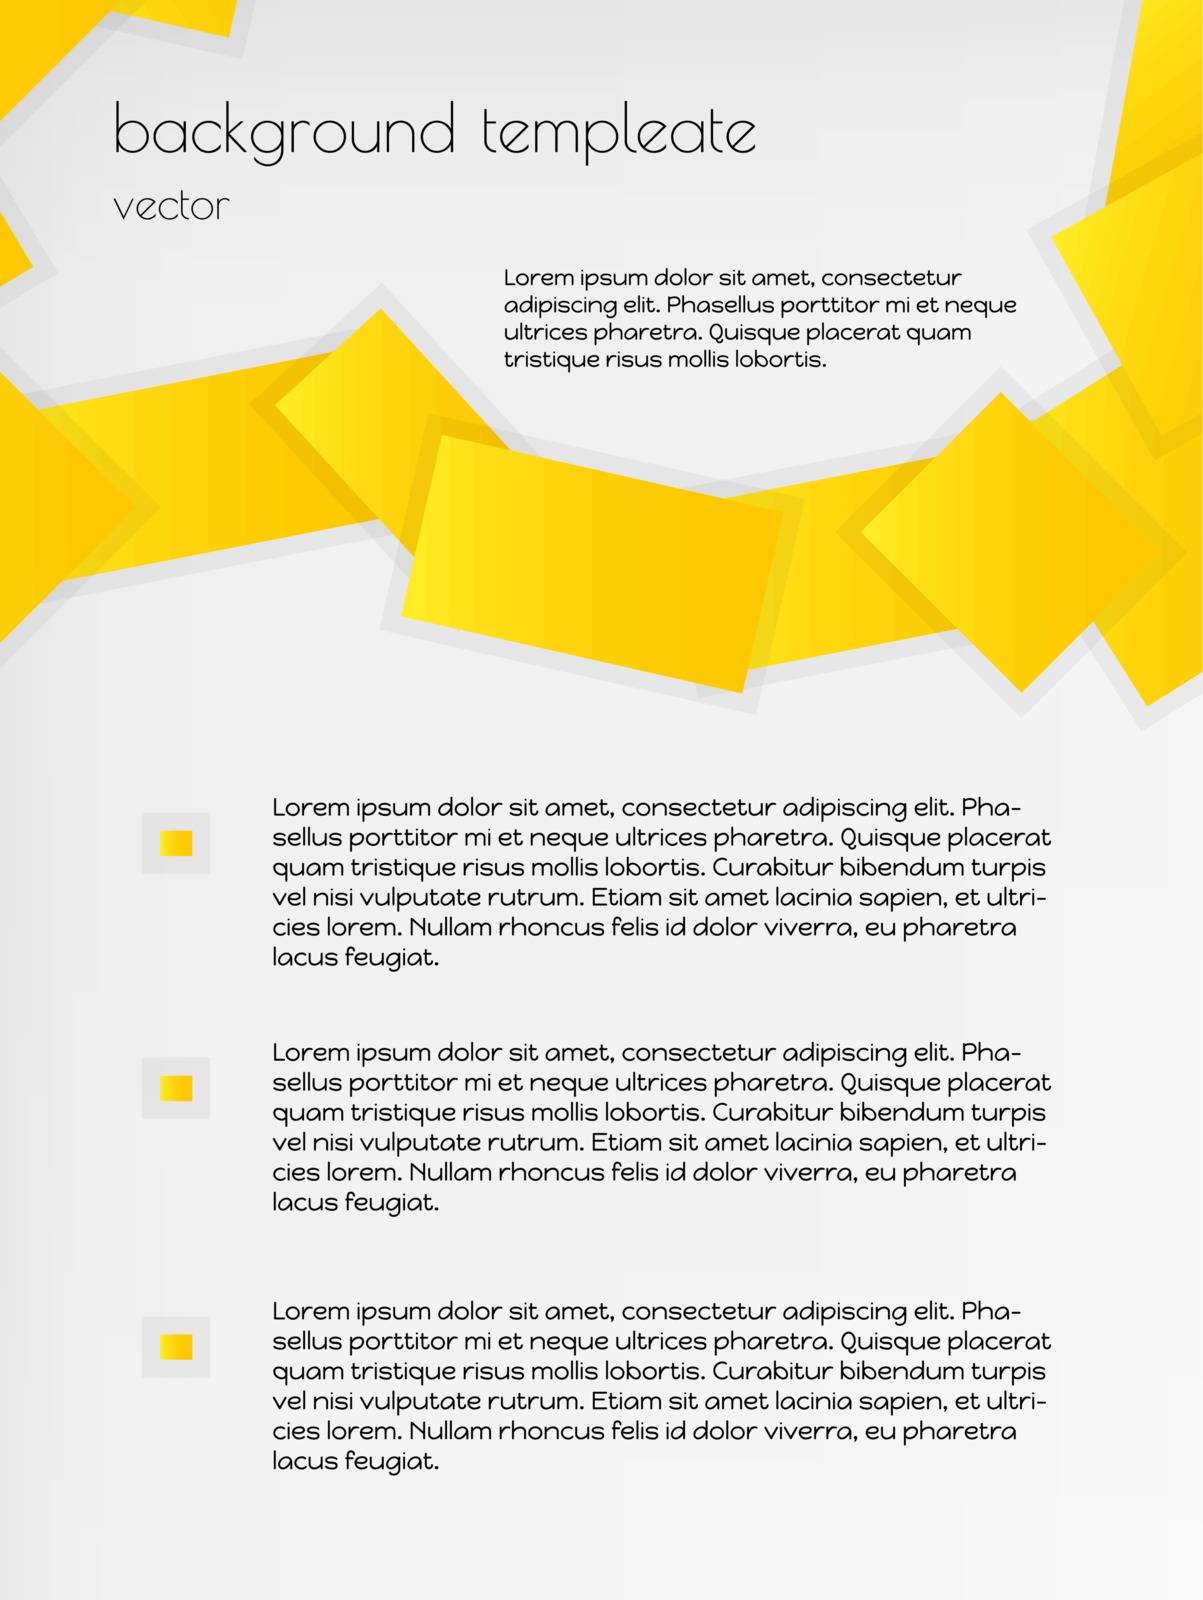 infographic background template with gold squares on gray background